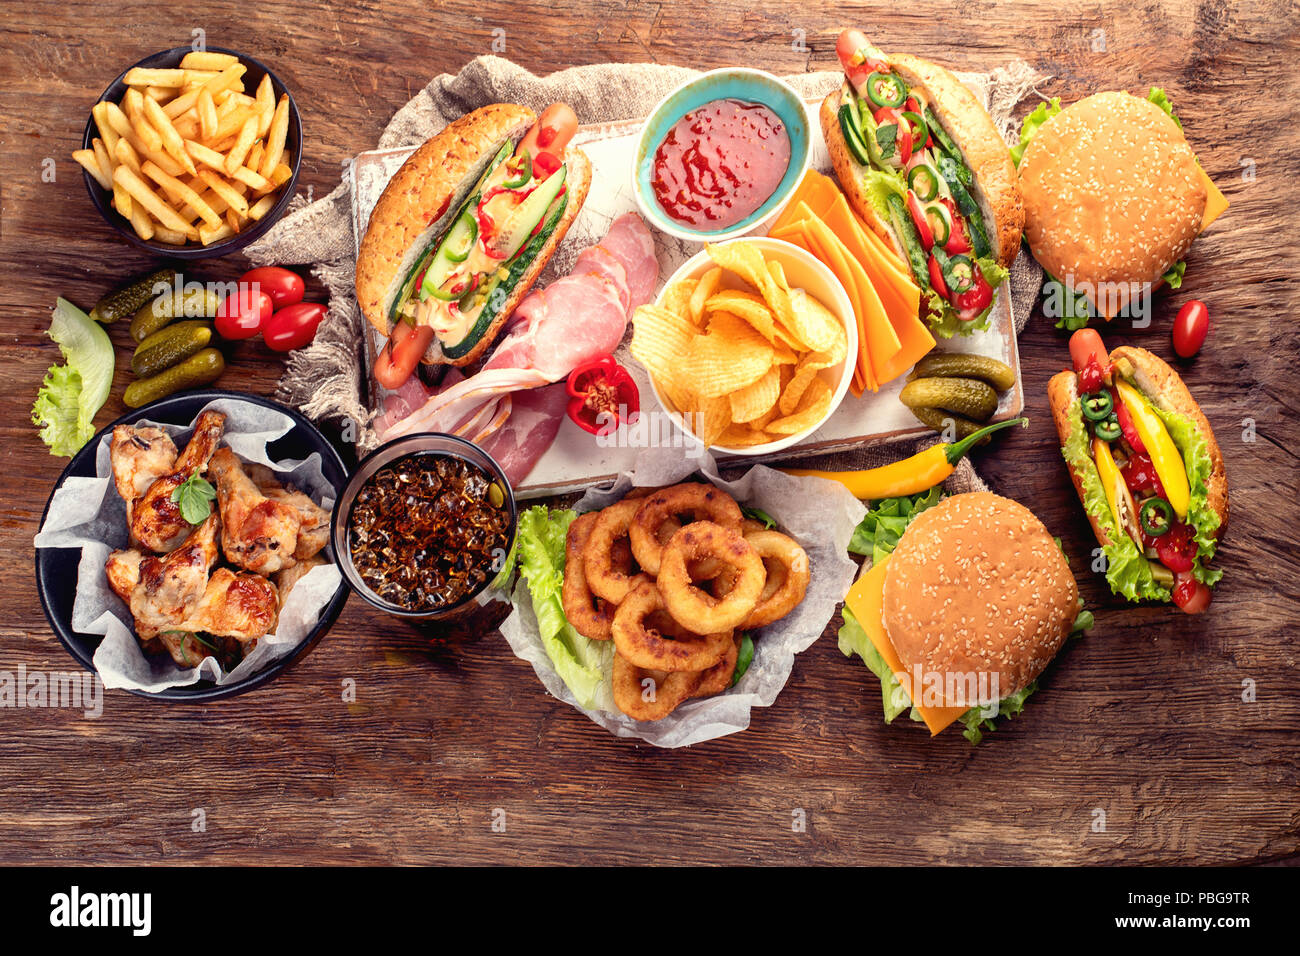 American food. Fast food. Top view Stock Photo